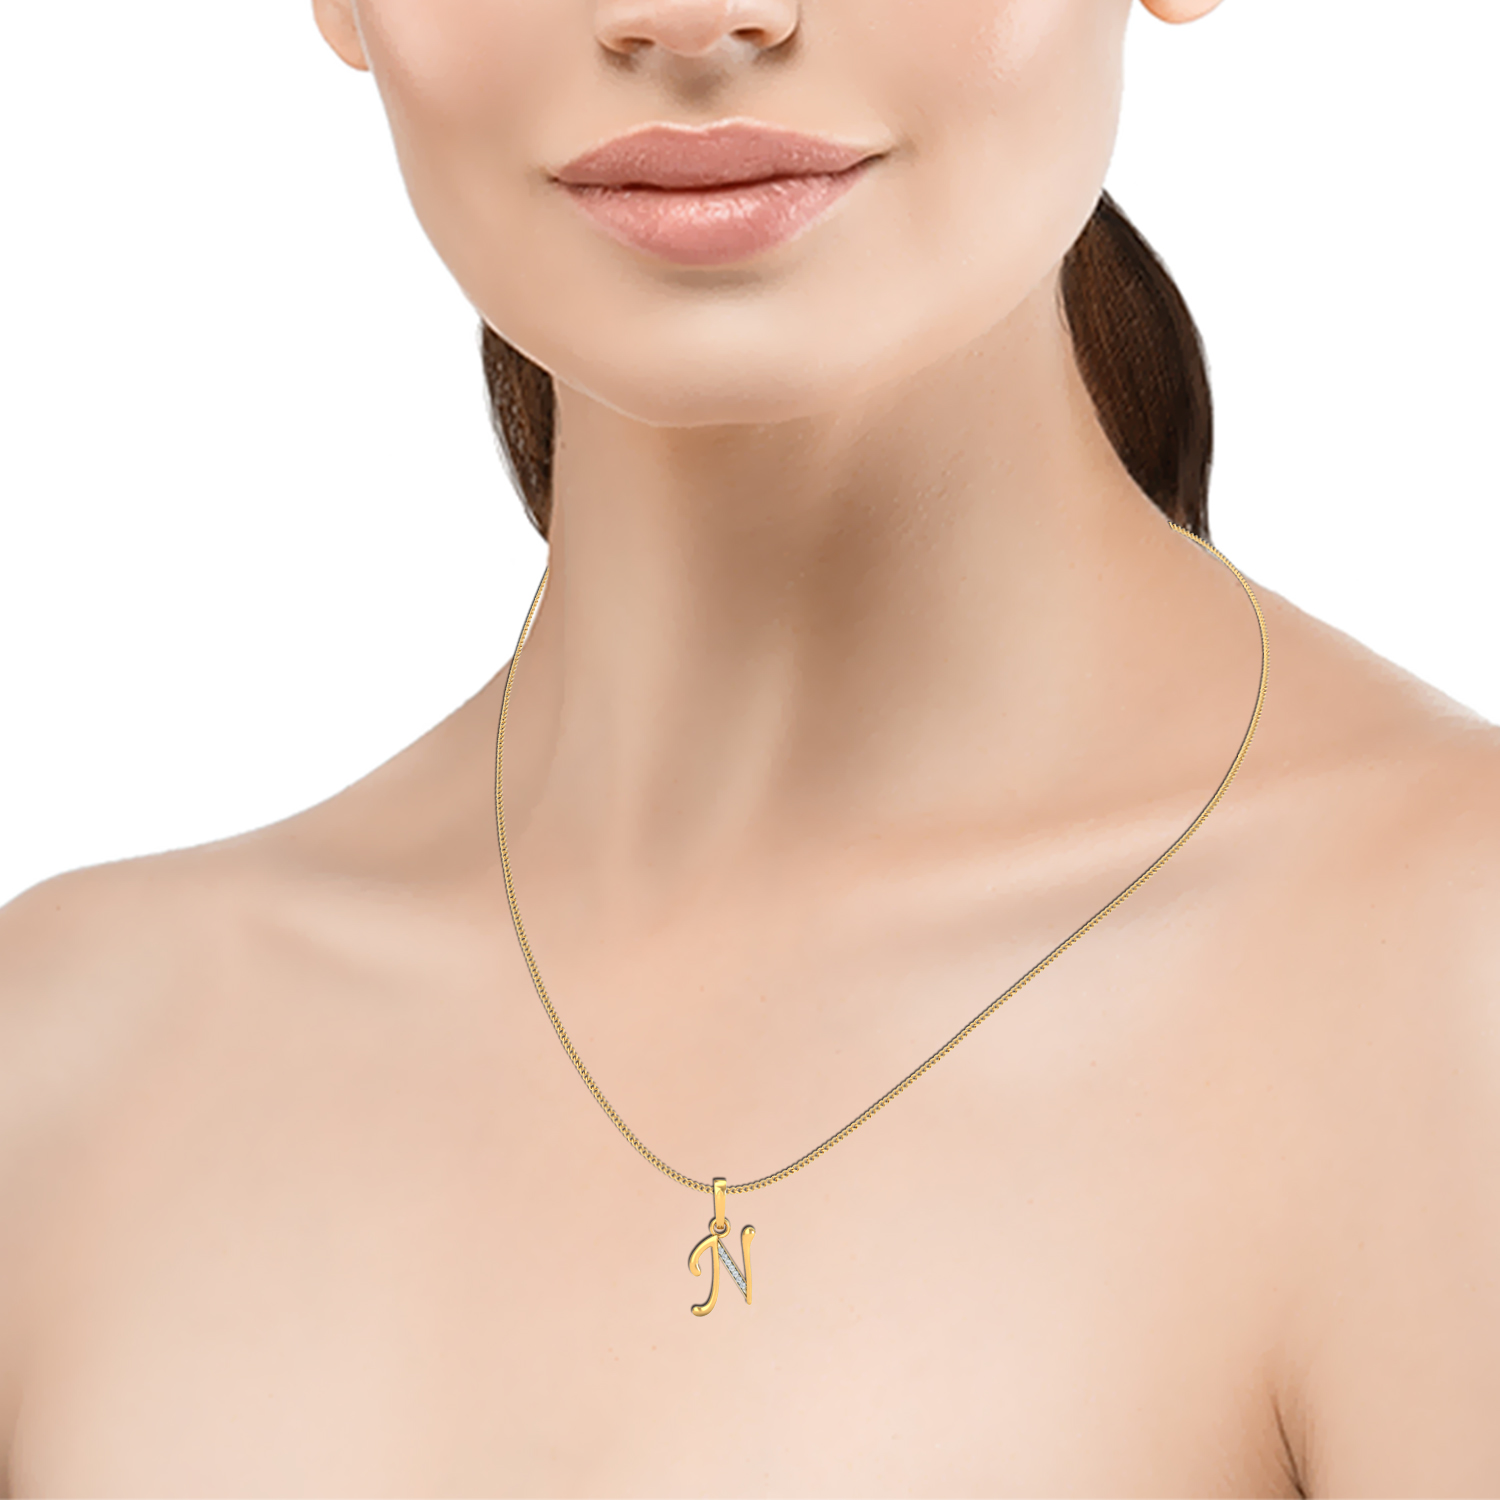 Dainty Letter N Pendant Necklace - Fame Accessories